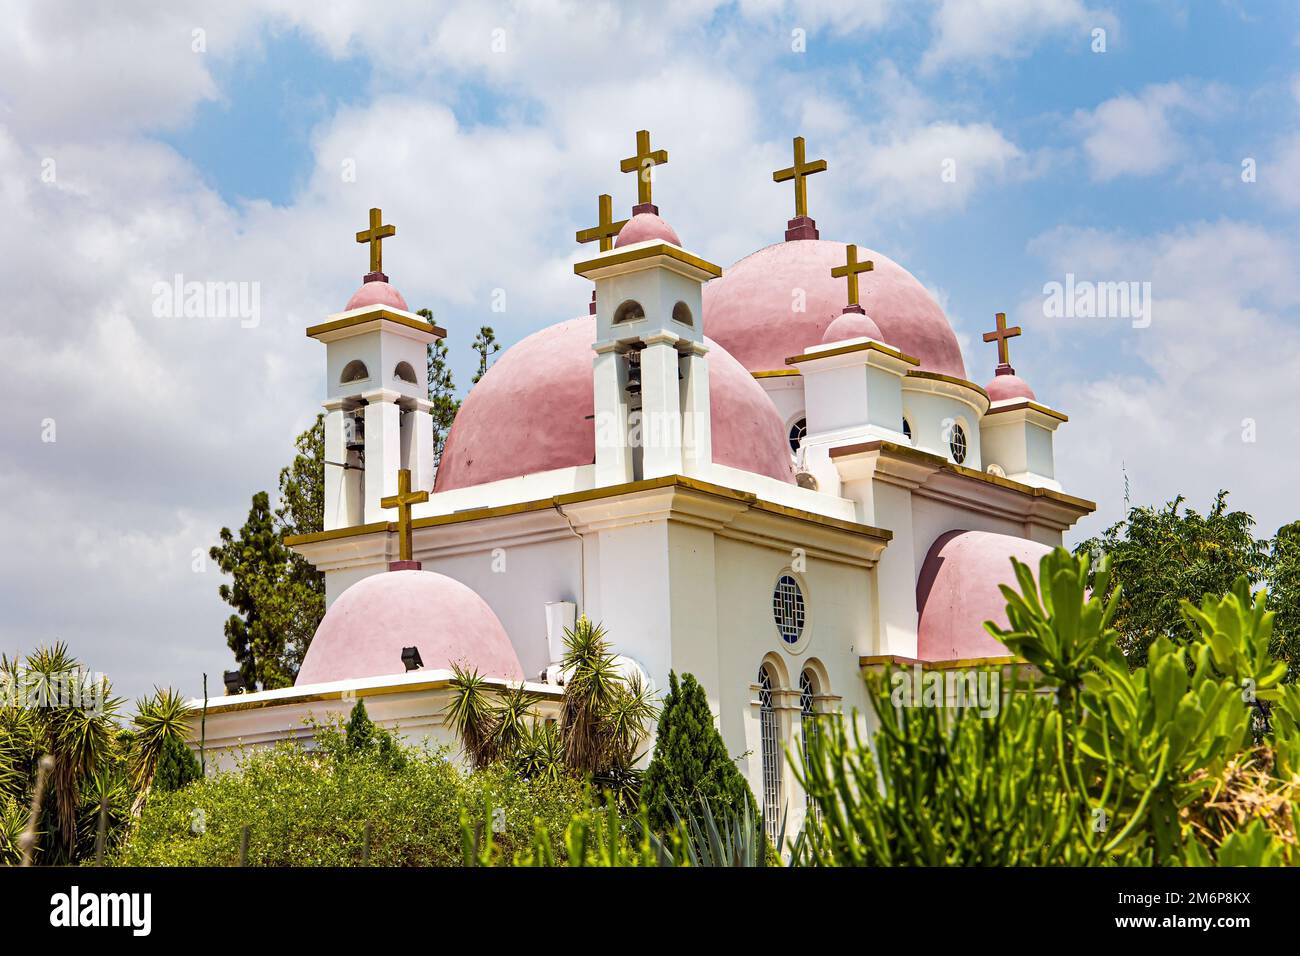 Pink domes with golden crosses Stock Photo